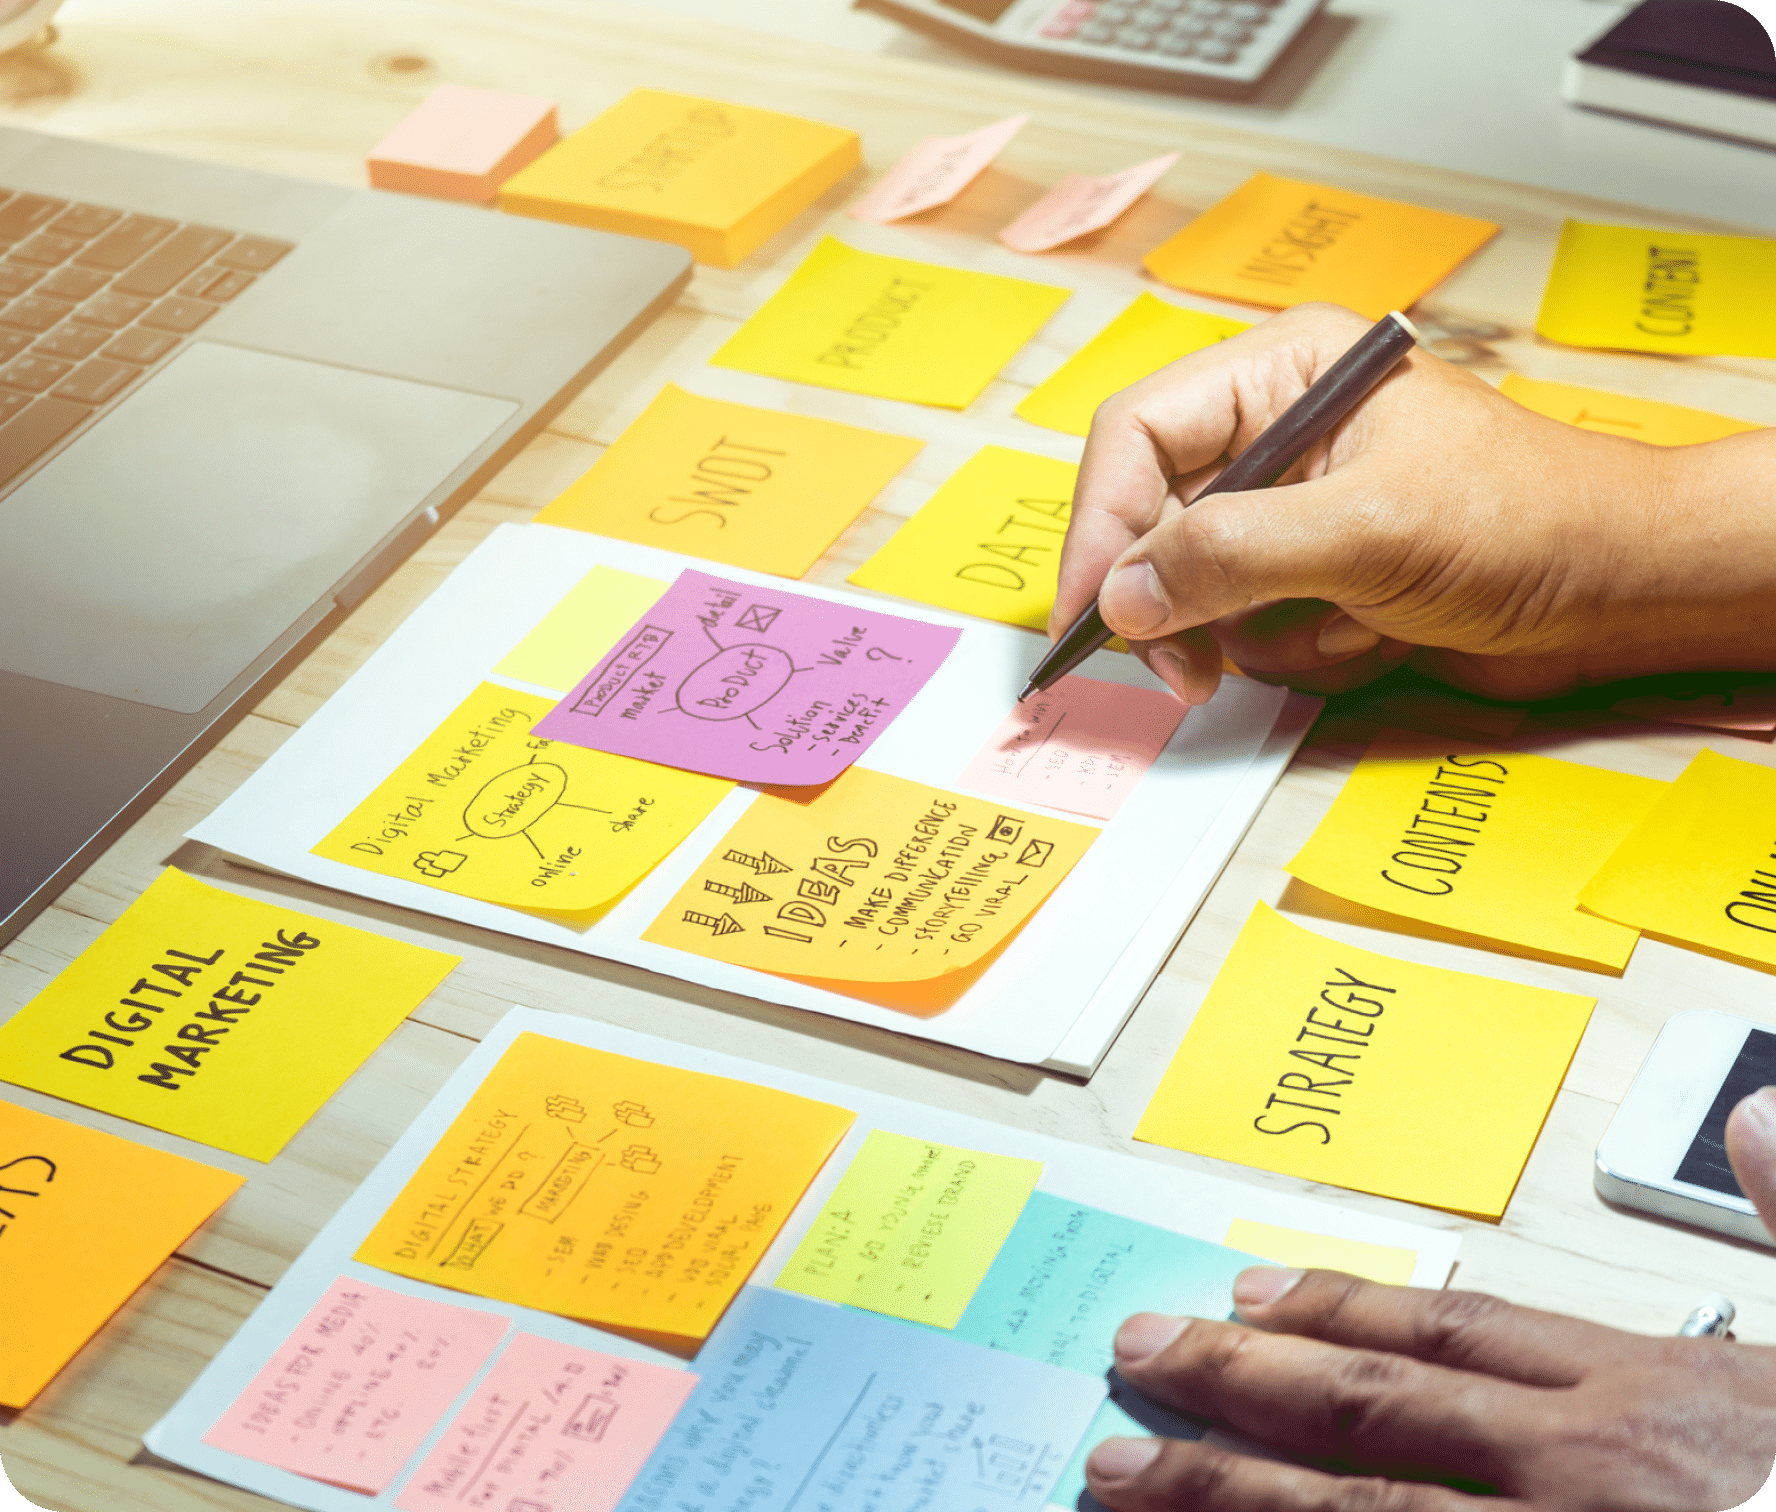 Content strategy board with various sticky notes, and a person writing a note.